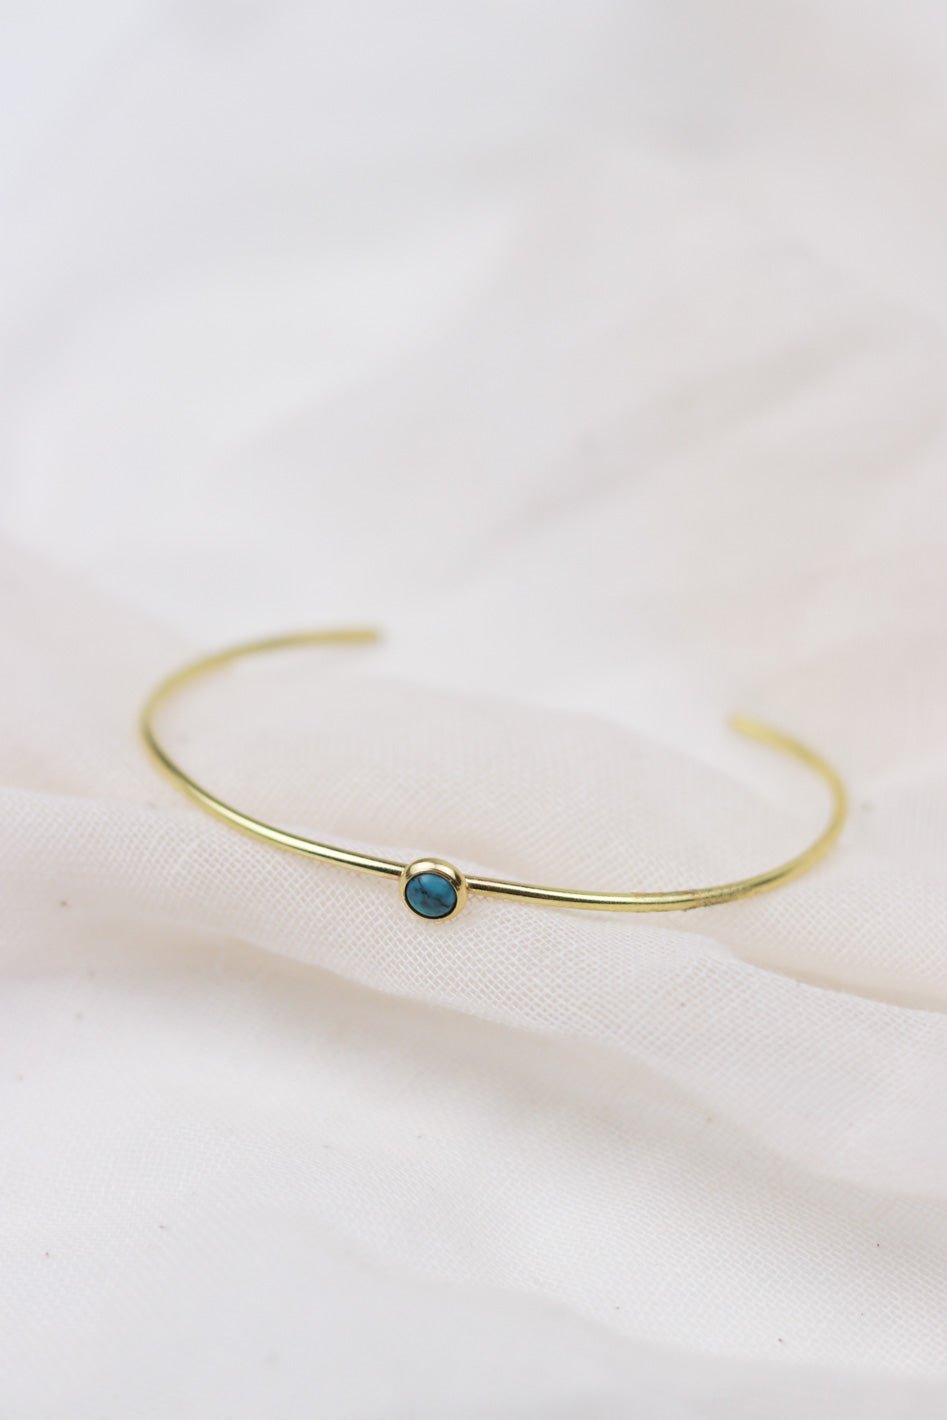 Hyalite Turquoise Stacker Cuff - Heyday